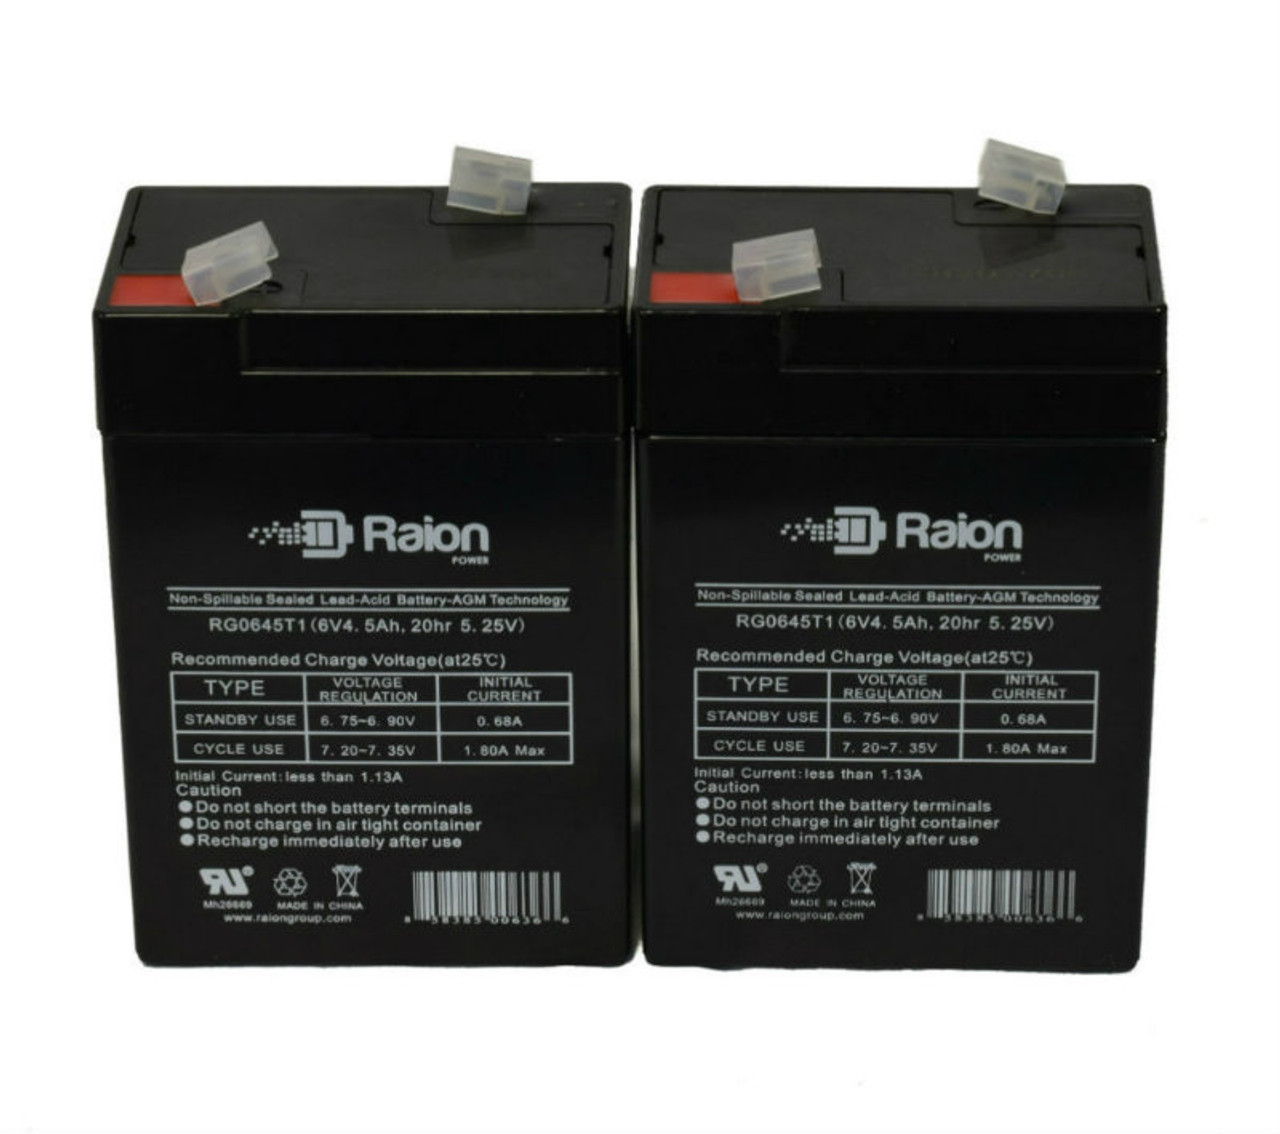 Raion Power RG0645T1 6V 4.5Ah Replacement Medical Equipment Battery for Baxter Healthcare 522 MICROATE Infusion Pump - 2 Pack